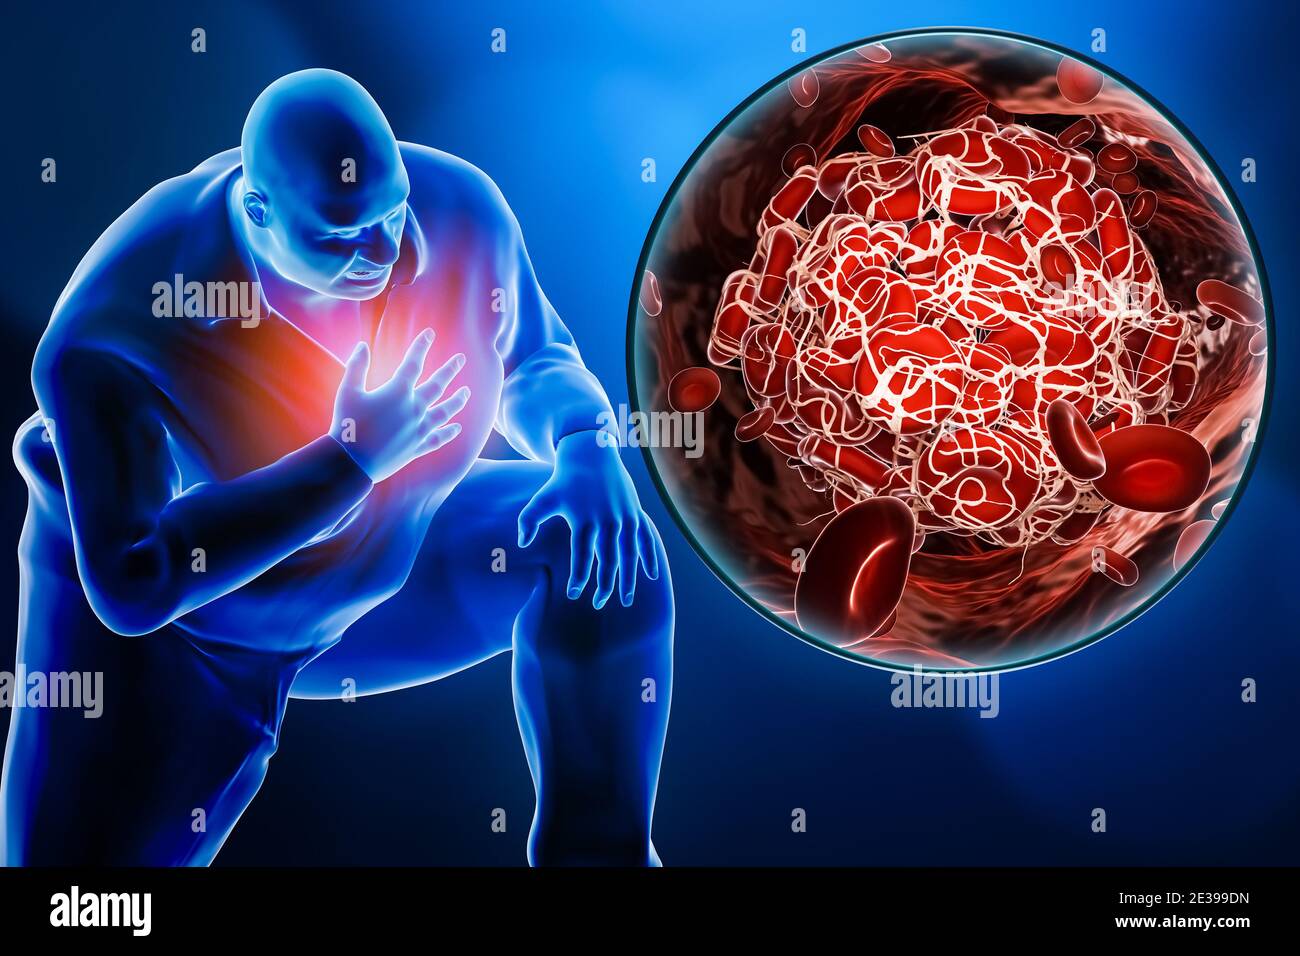 Obese or overweight man suffering a heart attack or a pulmonary embolism with a close-up image of a blood clot 3D rendering illustration. Medicine, me Stock Photo